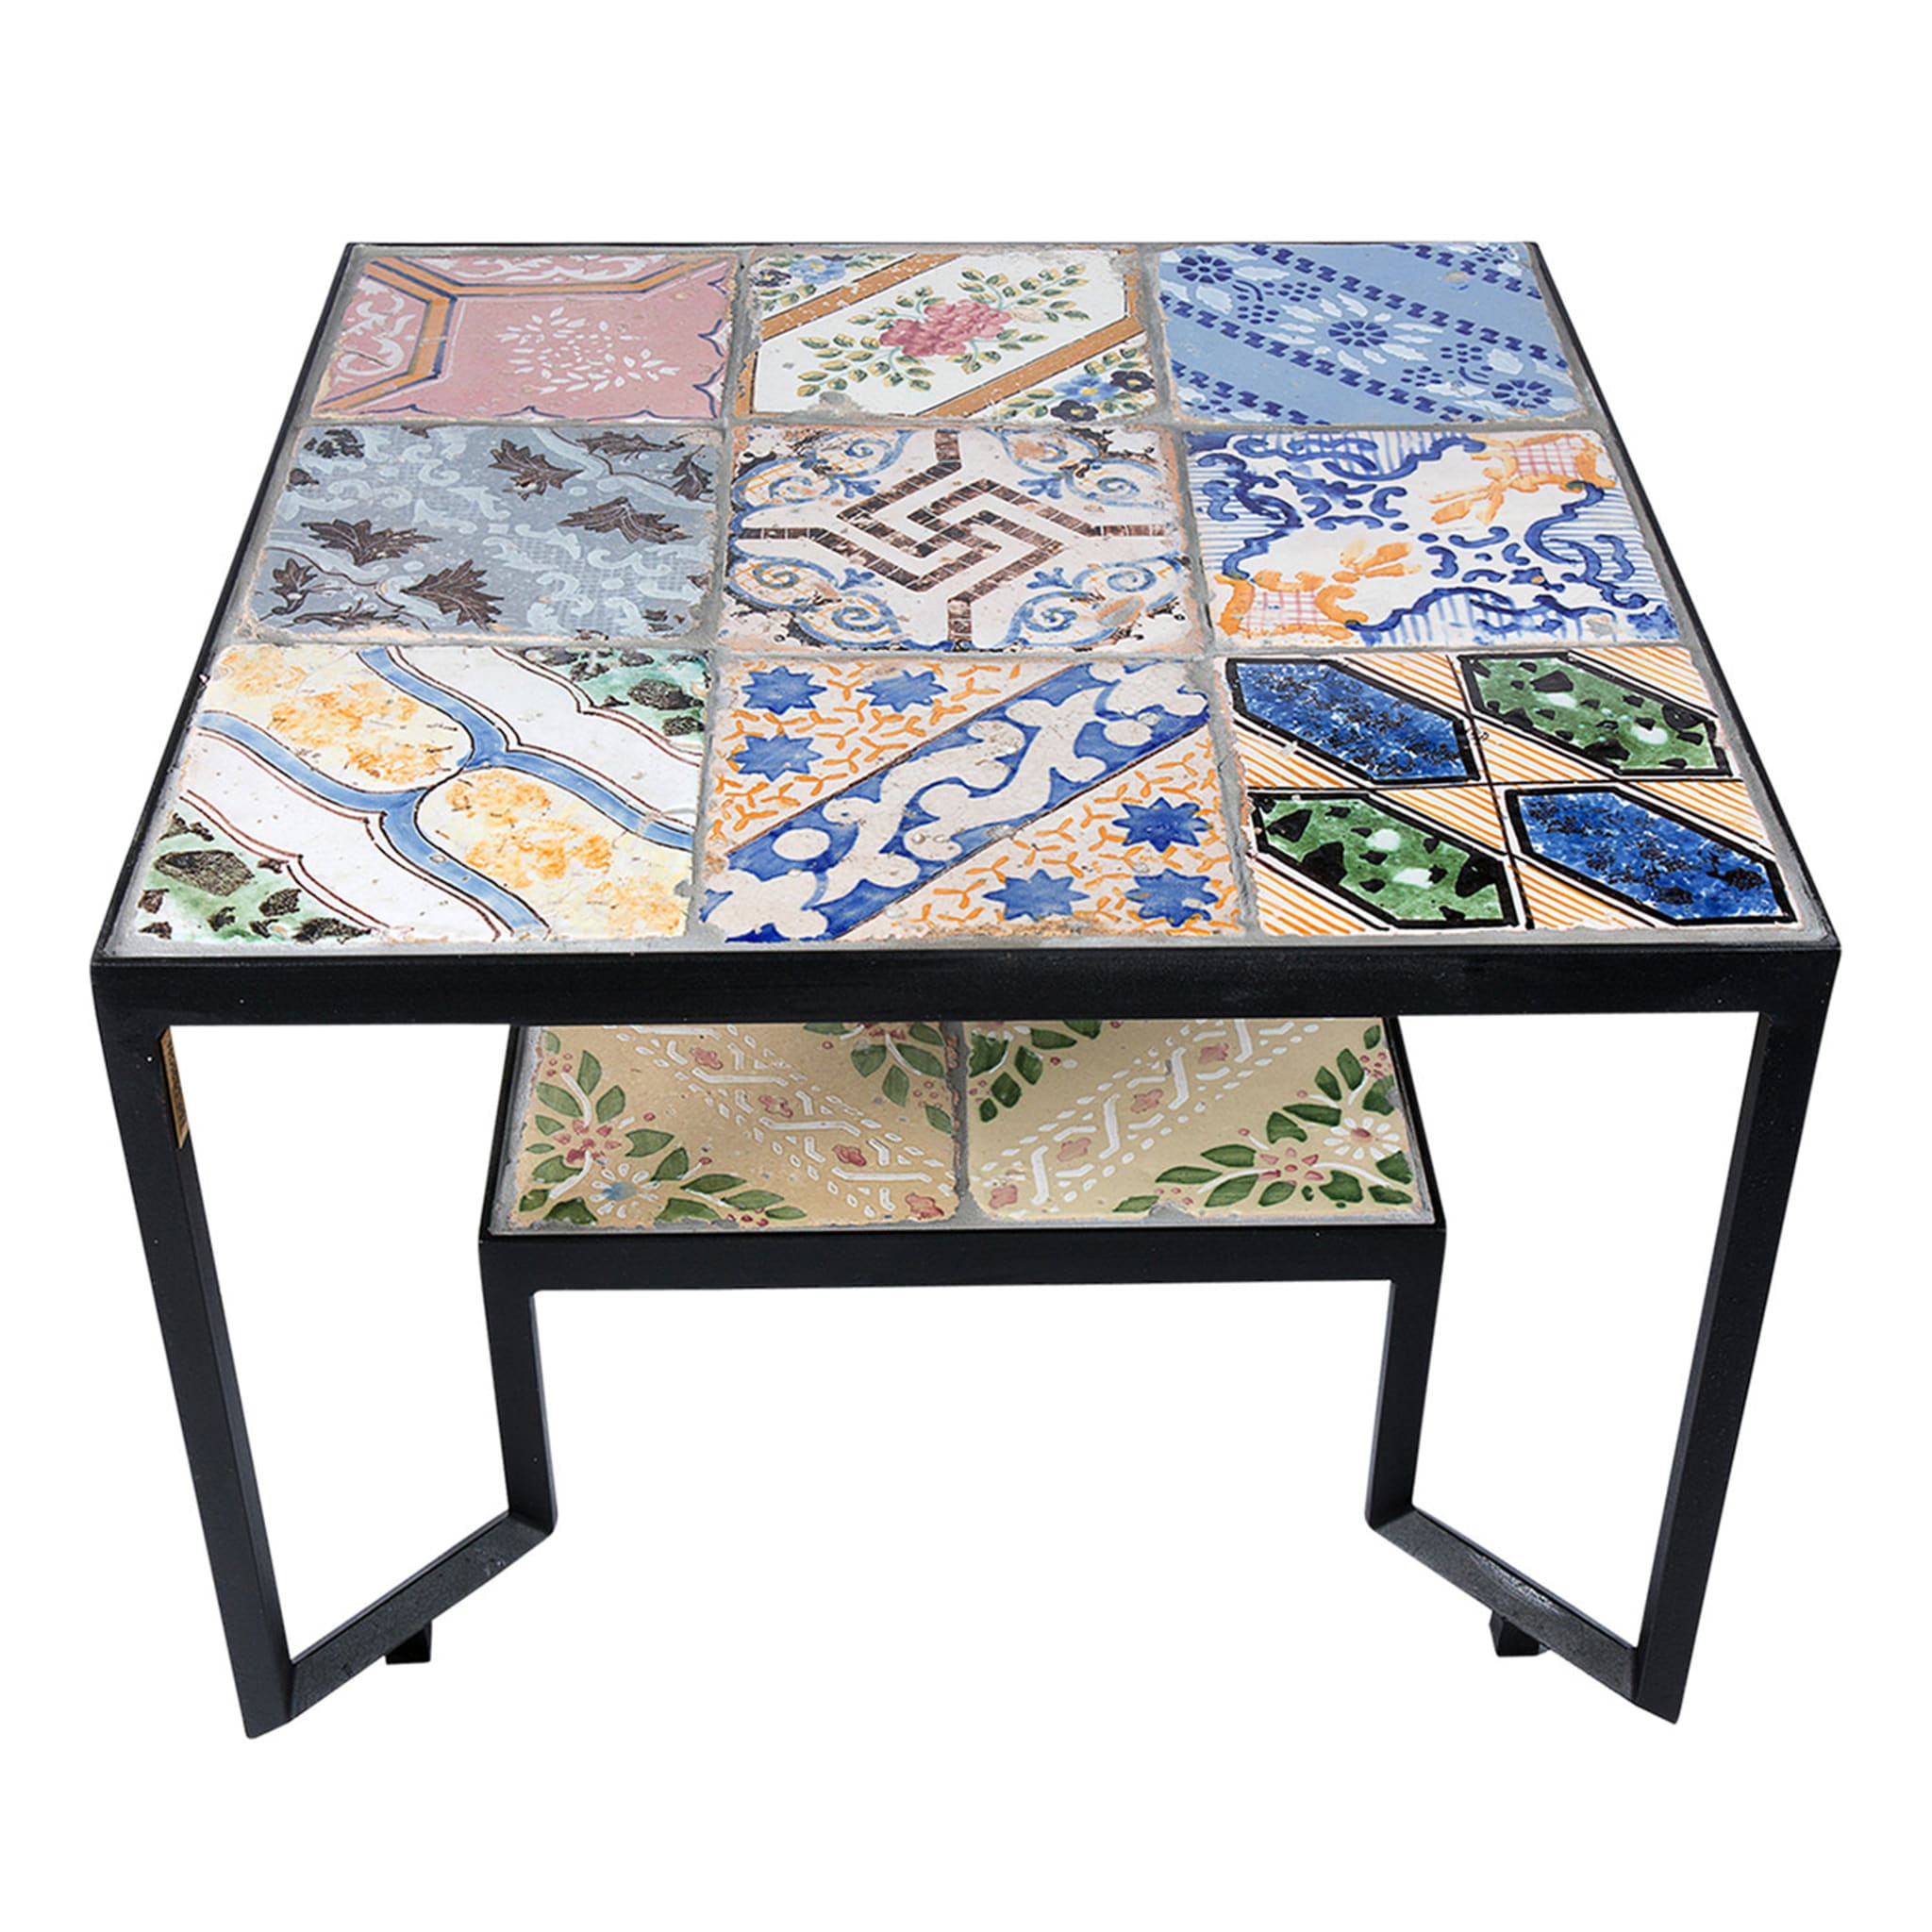 Colorato Tiles Spider Table - Main view